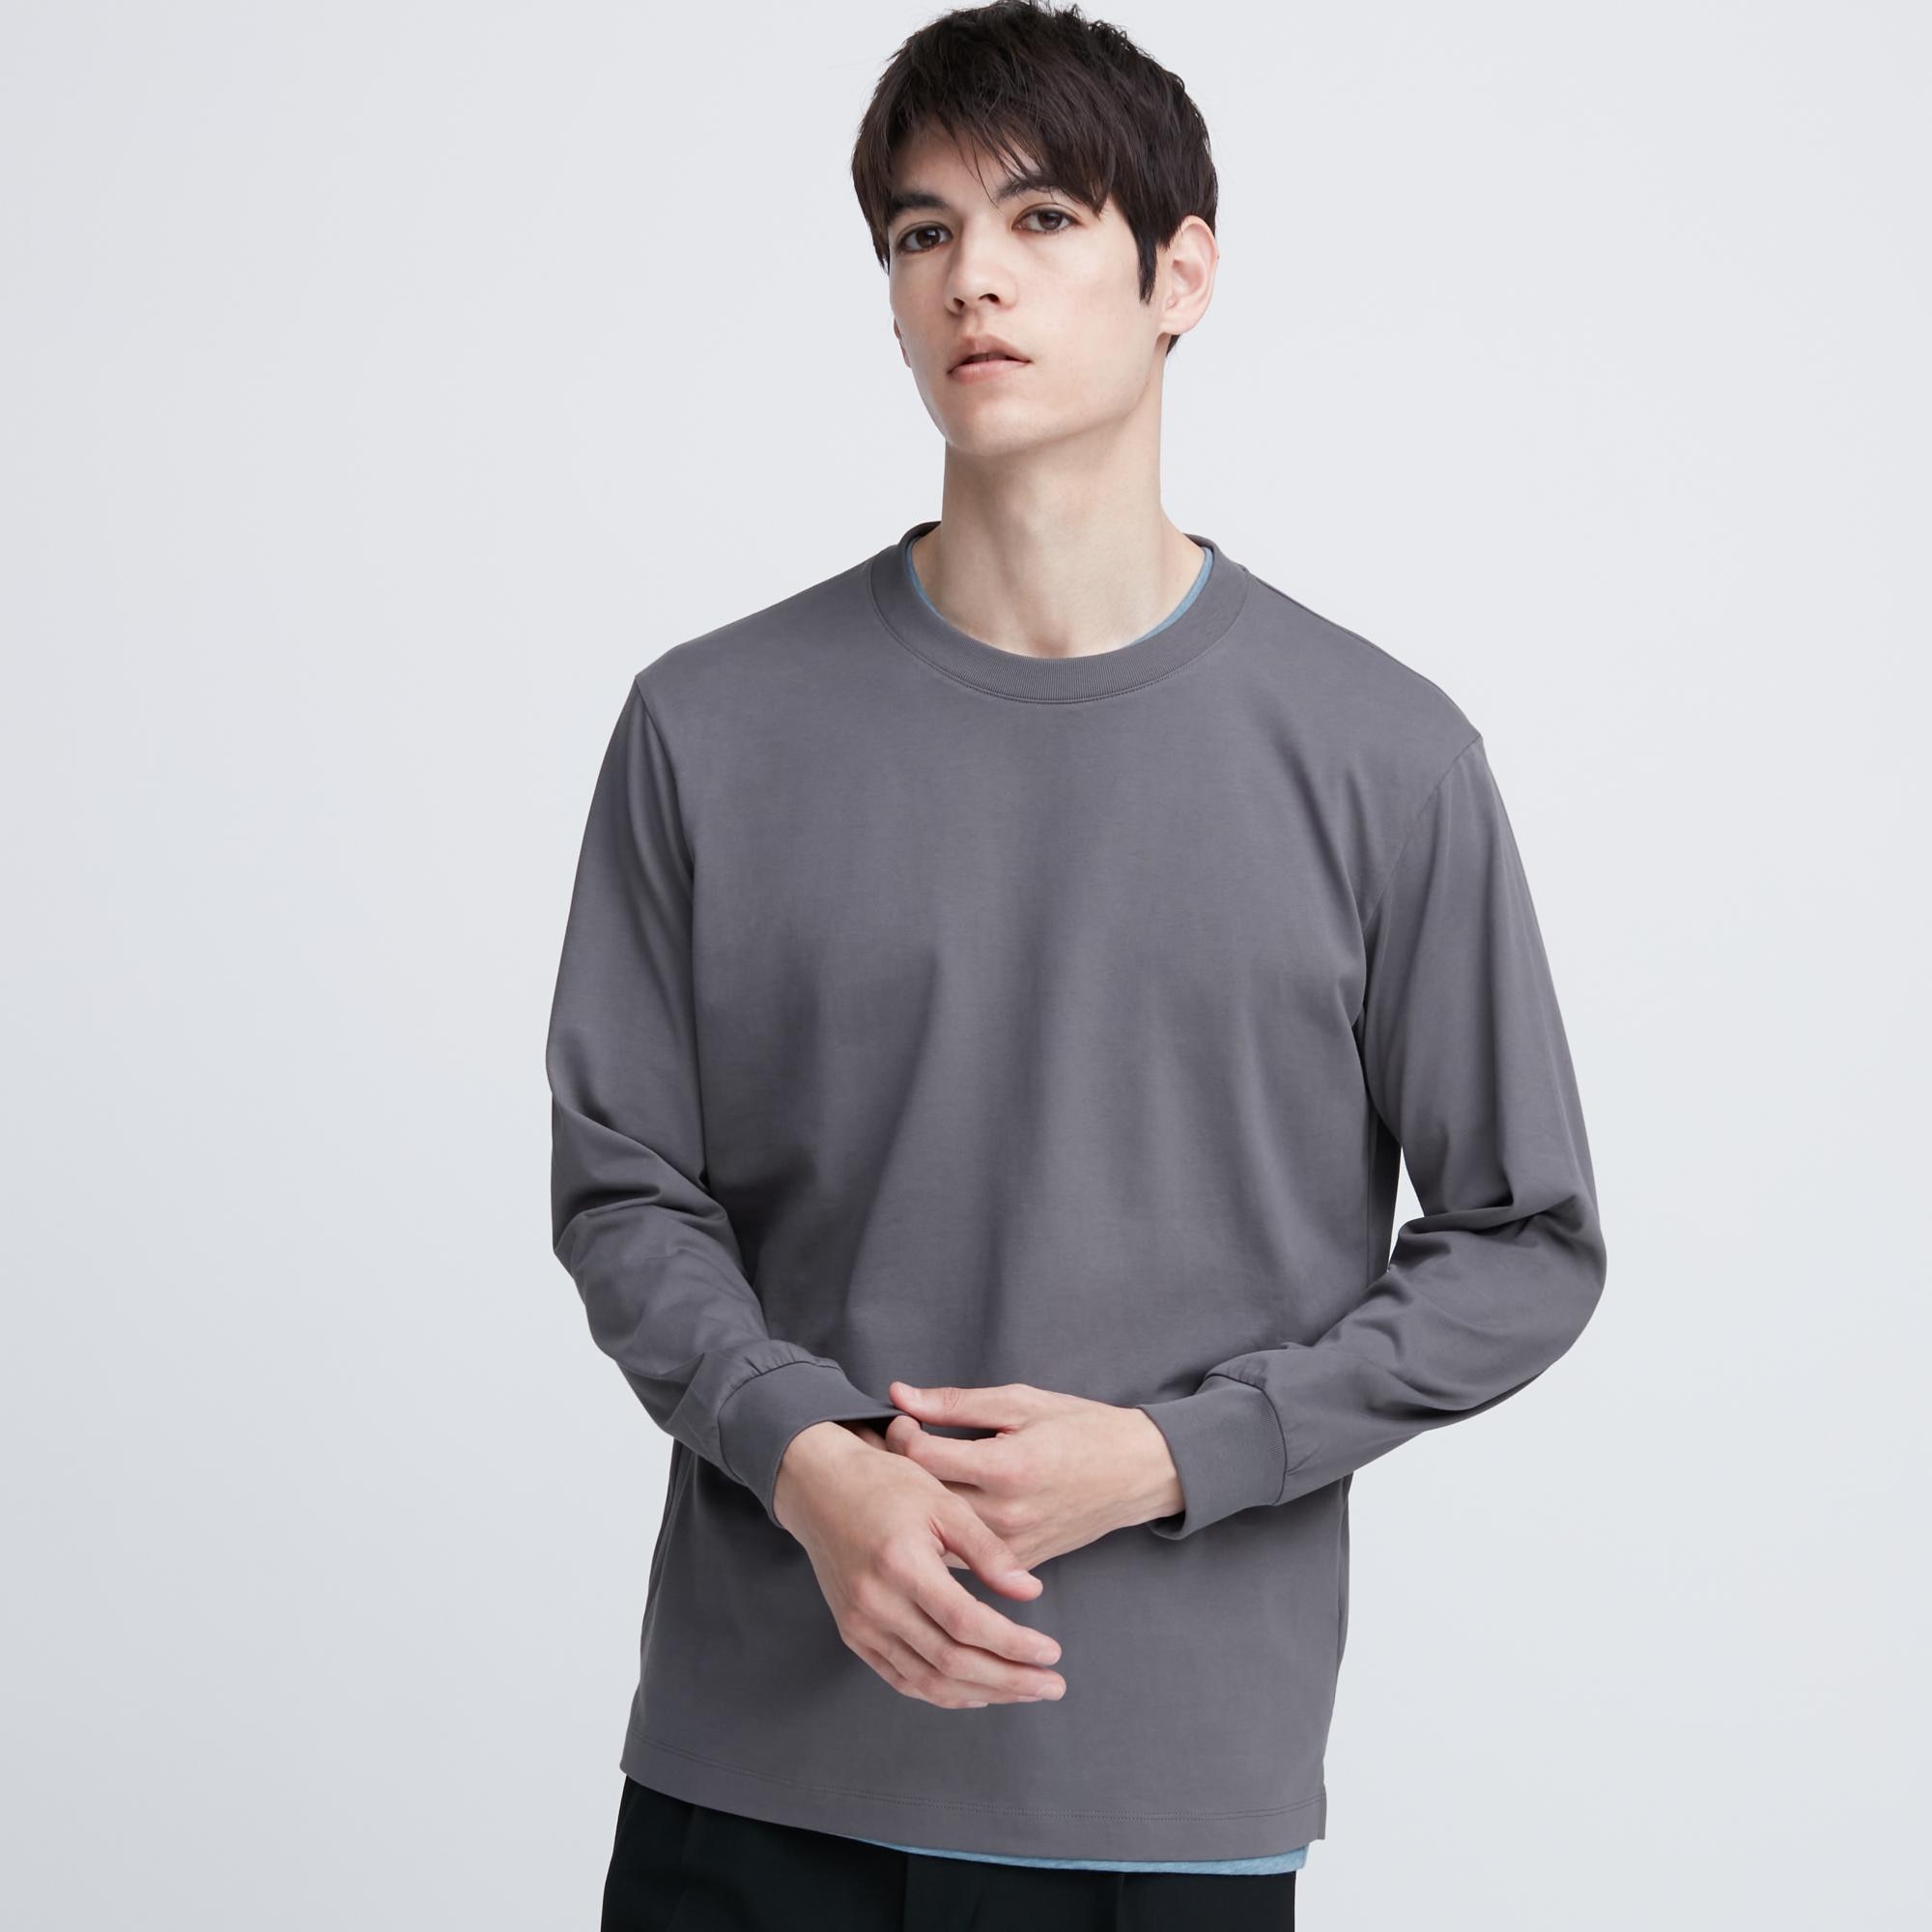 AIRism UV Protection Crew Neck Long Sleeve T-Shirt